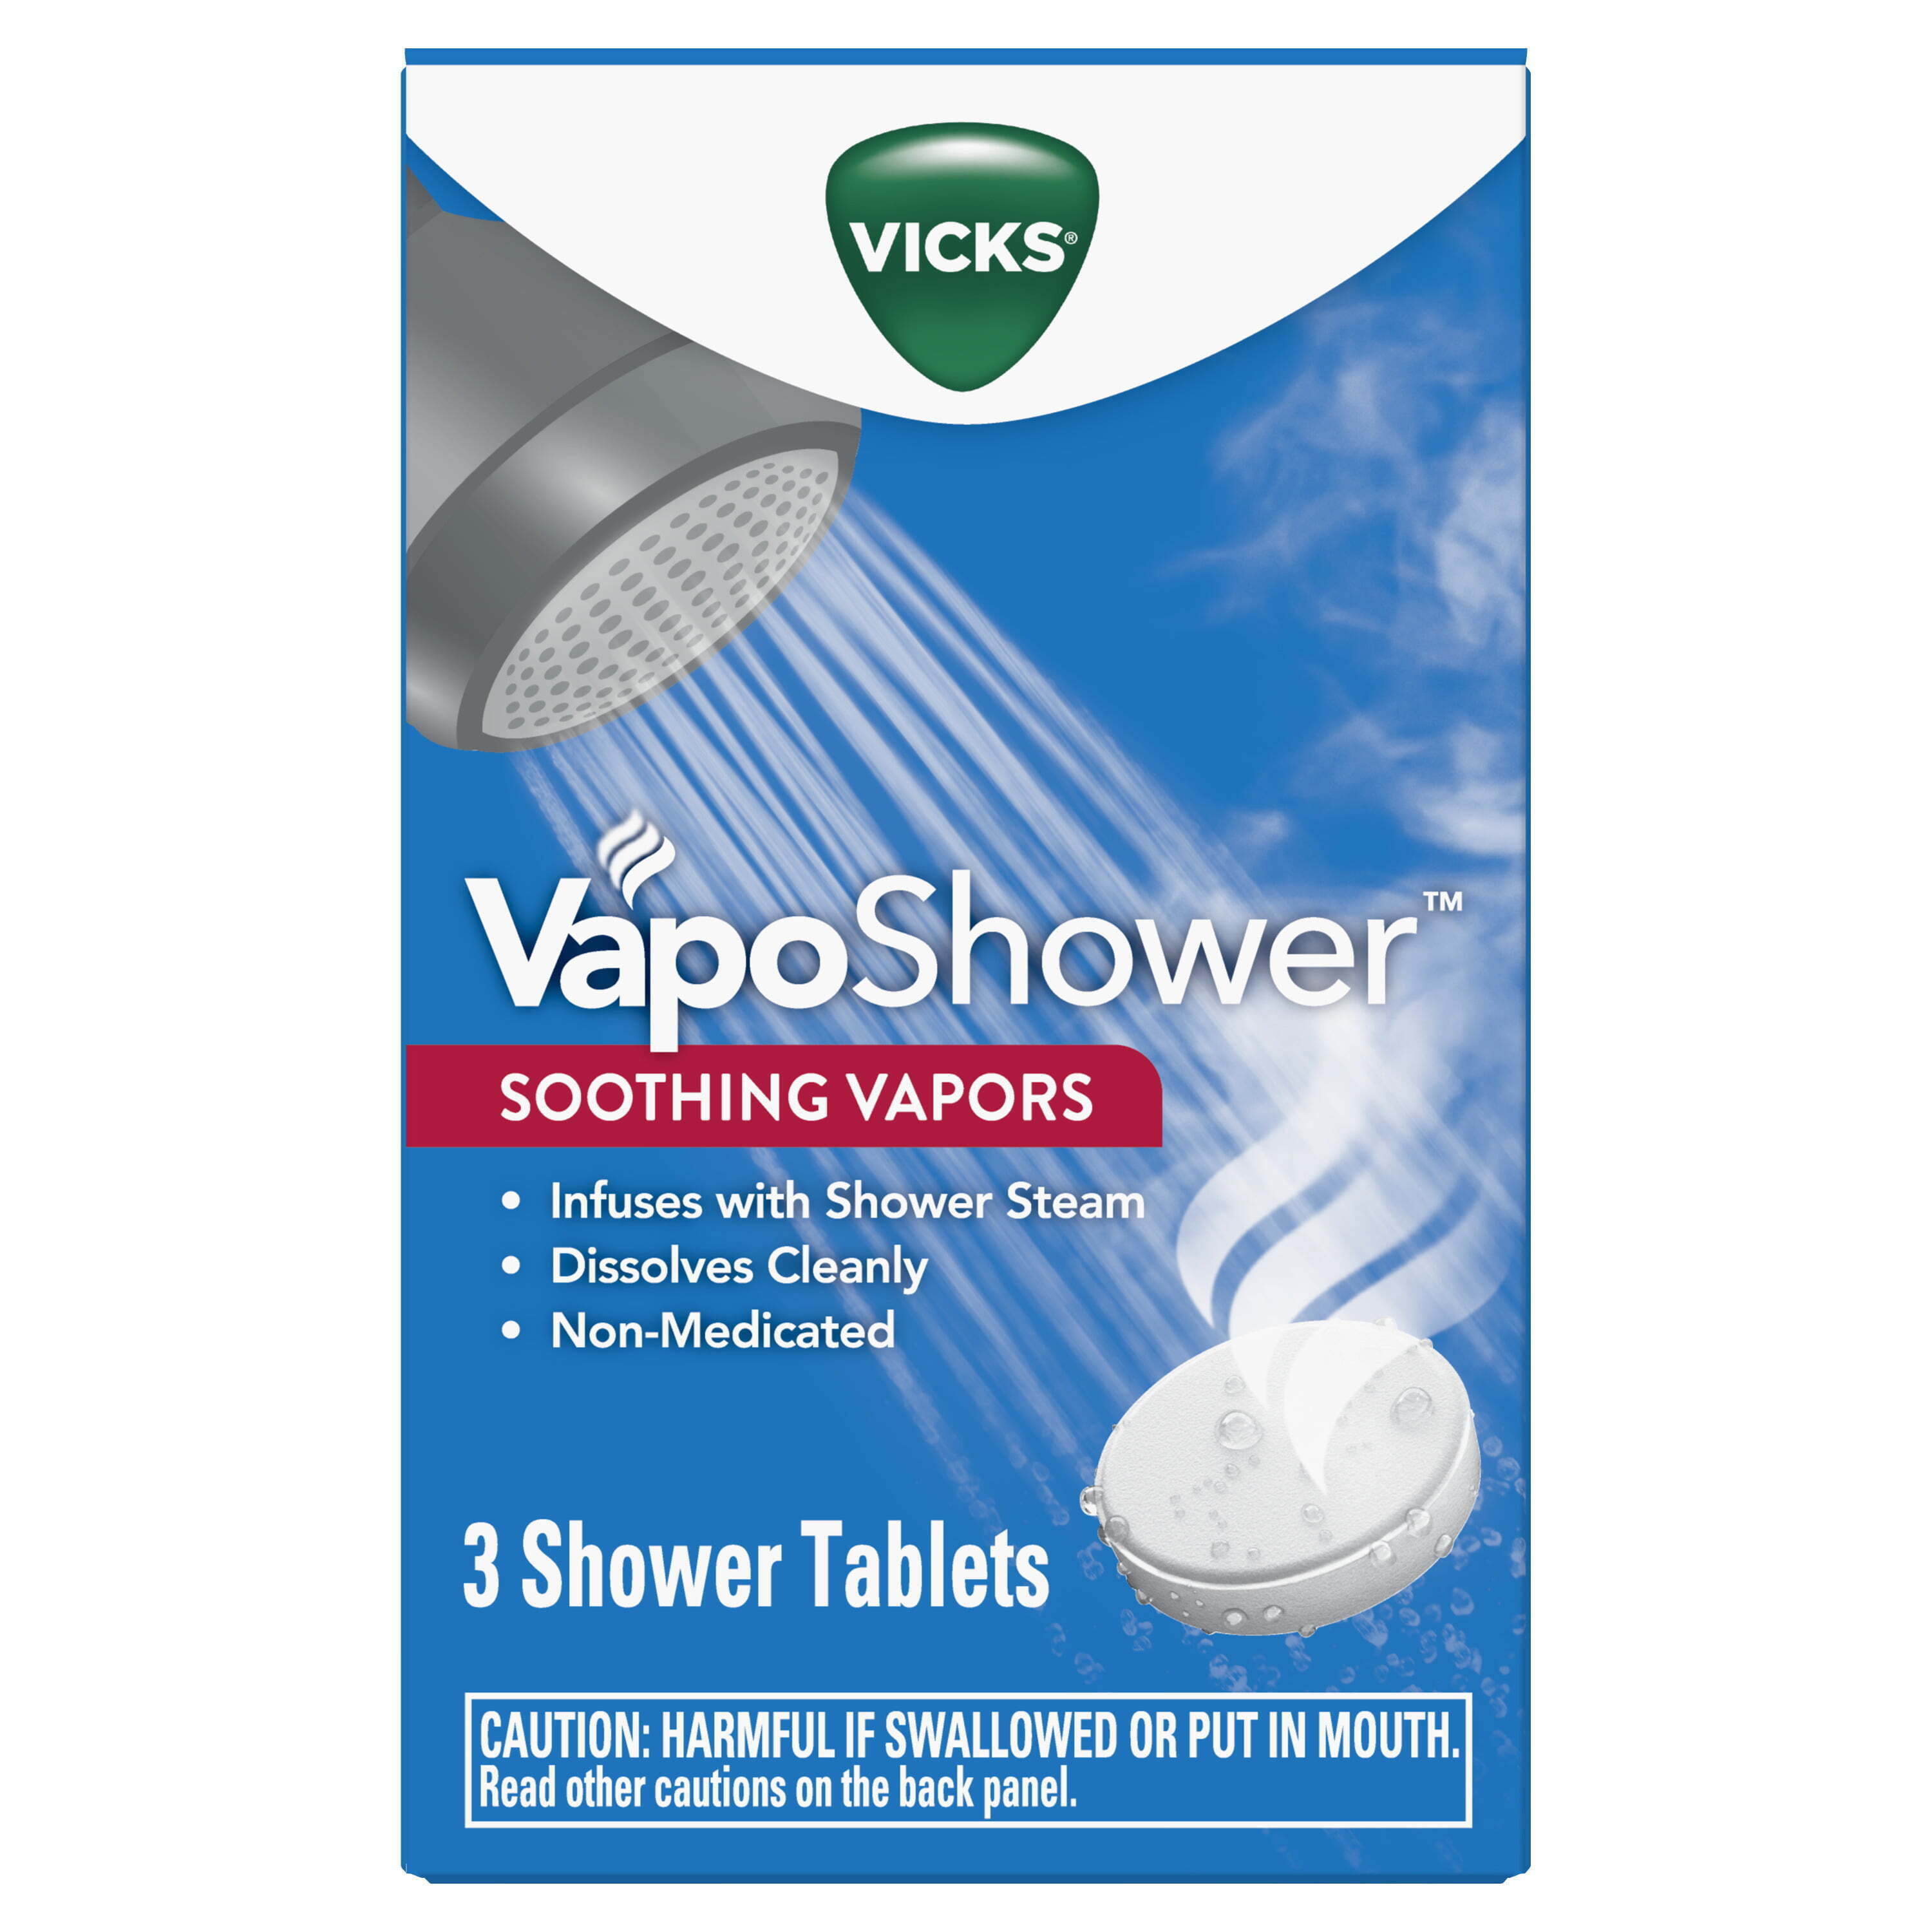 Vicks Vapo Shower, Dissolvable Shower Tablets for Cold Relief, Soothing and Non-Medicated, 3 Ct - image 1 of 10